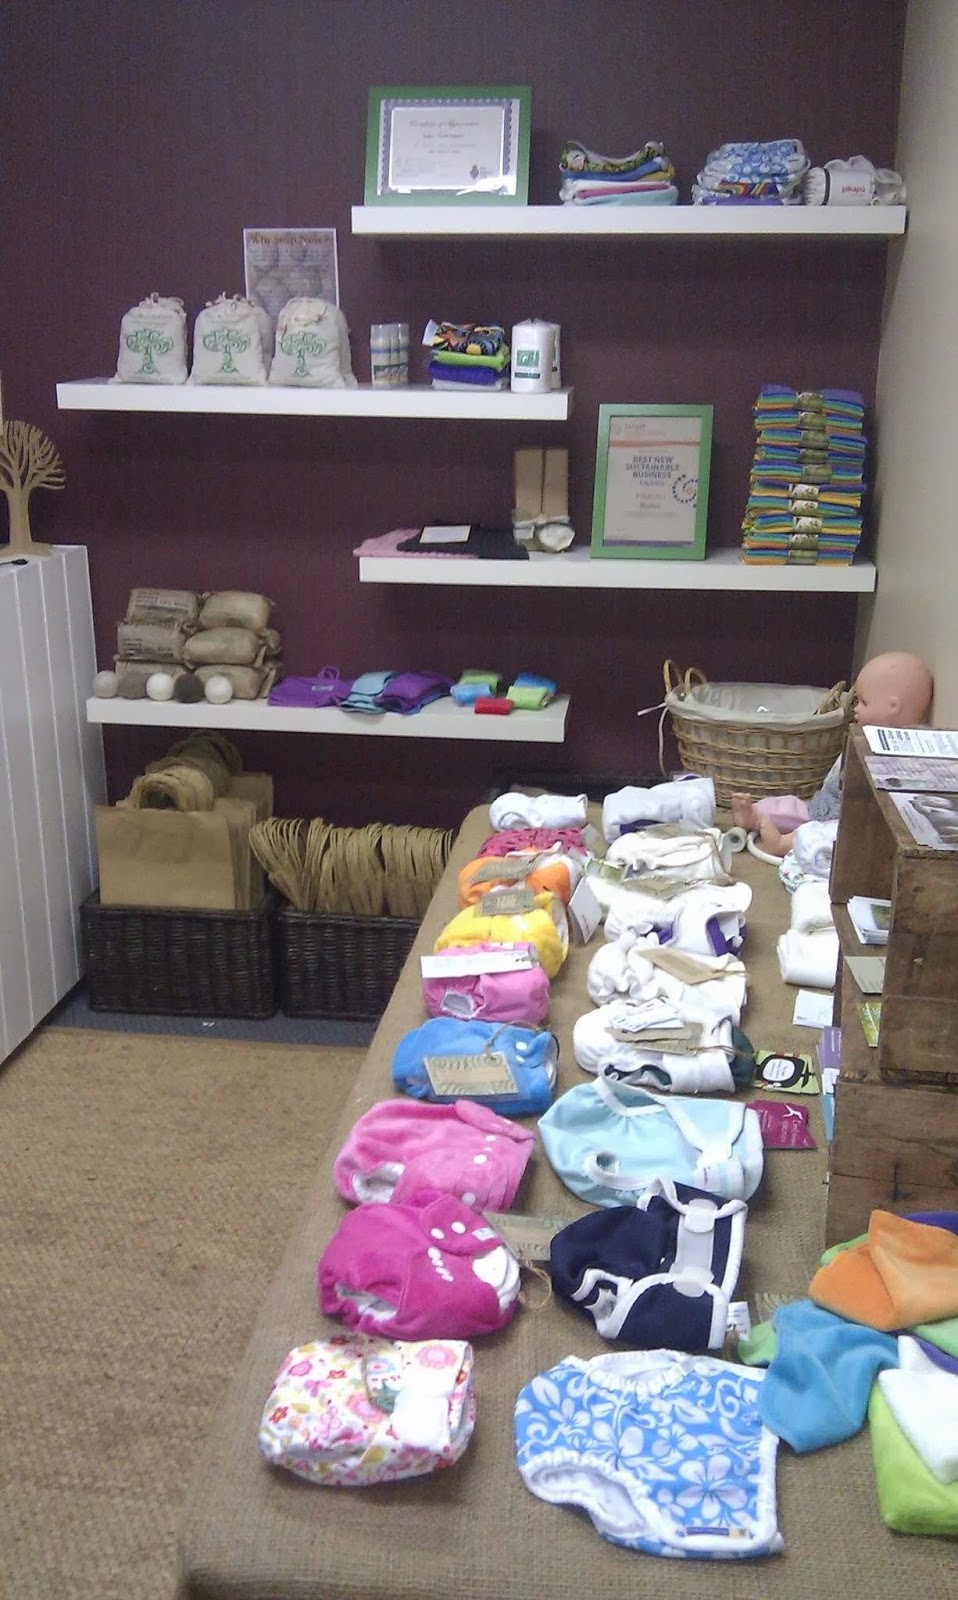 Bodeo Cloth Nappies | 7106/177-219 Mitchell Rd, Erskineville NSW 2043, Australia | Phone: 0412 833 896